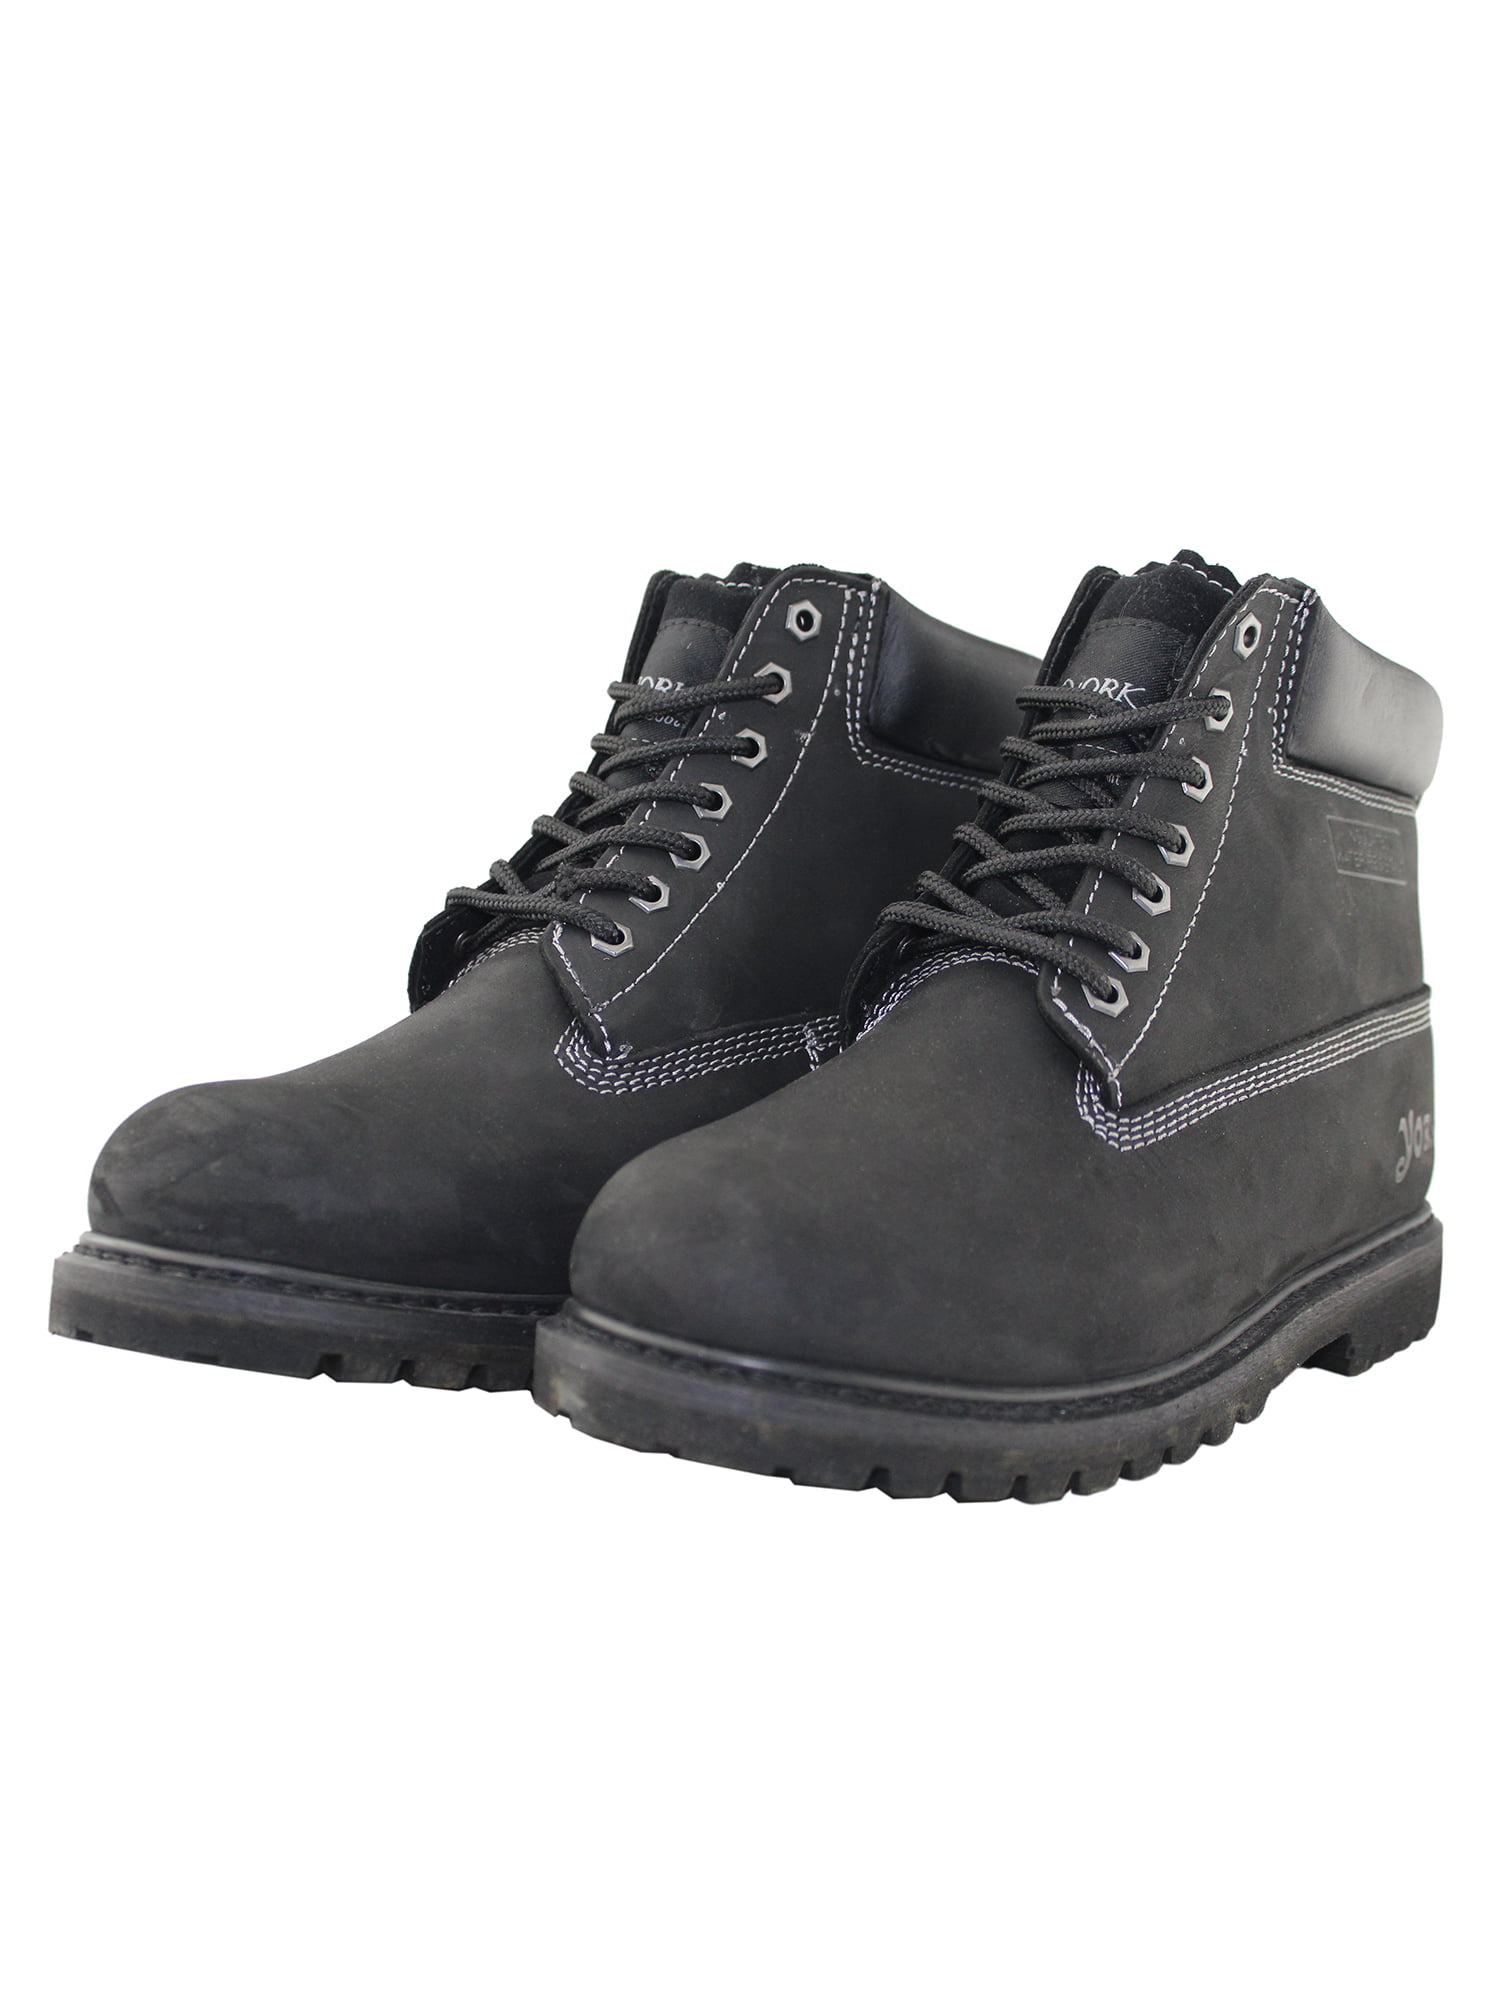 Details about   Slipbuster Safety Trainers Made of Nubuck Leather Slip Resistant 